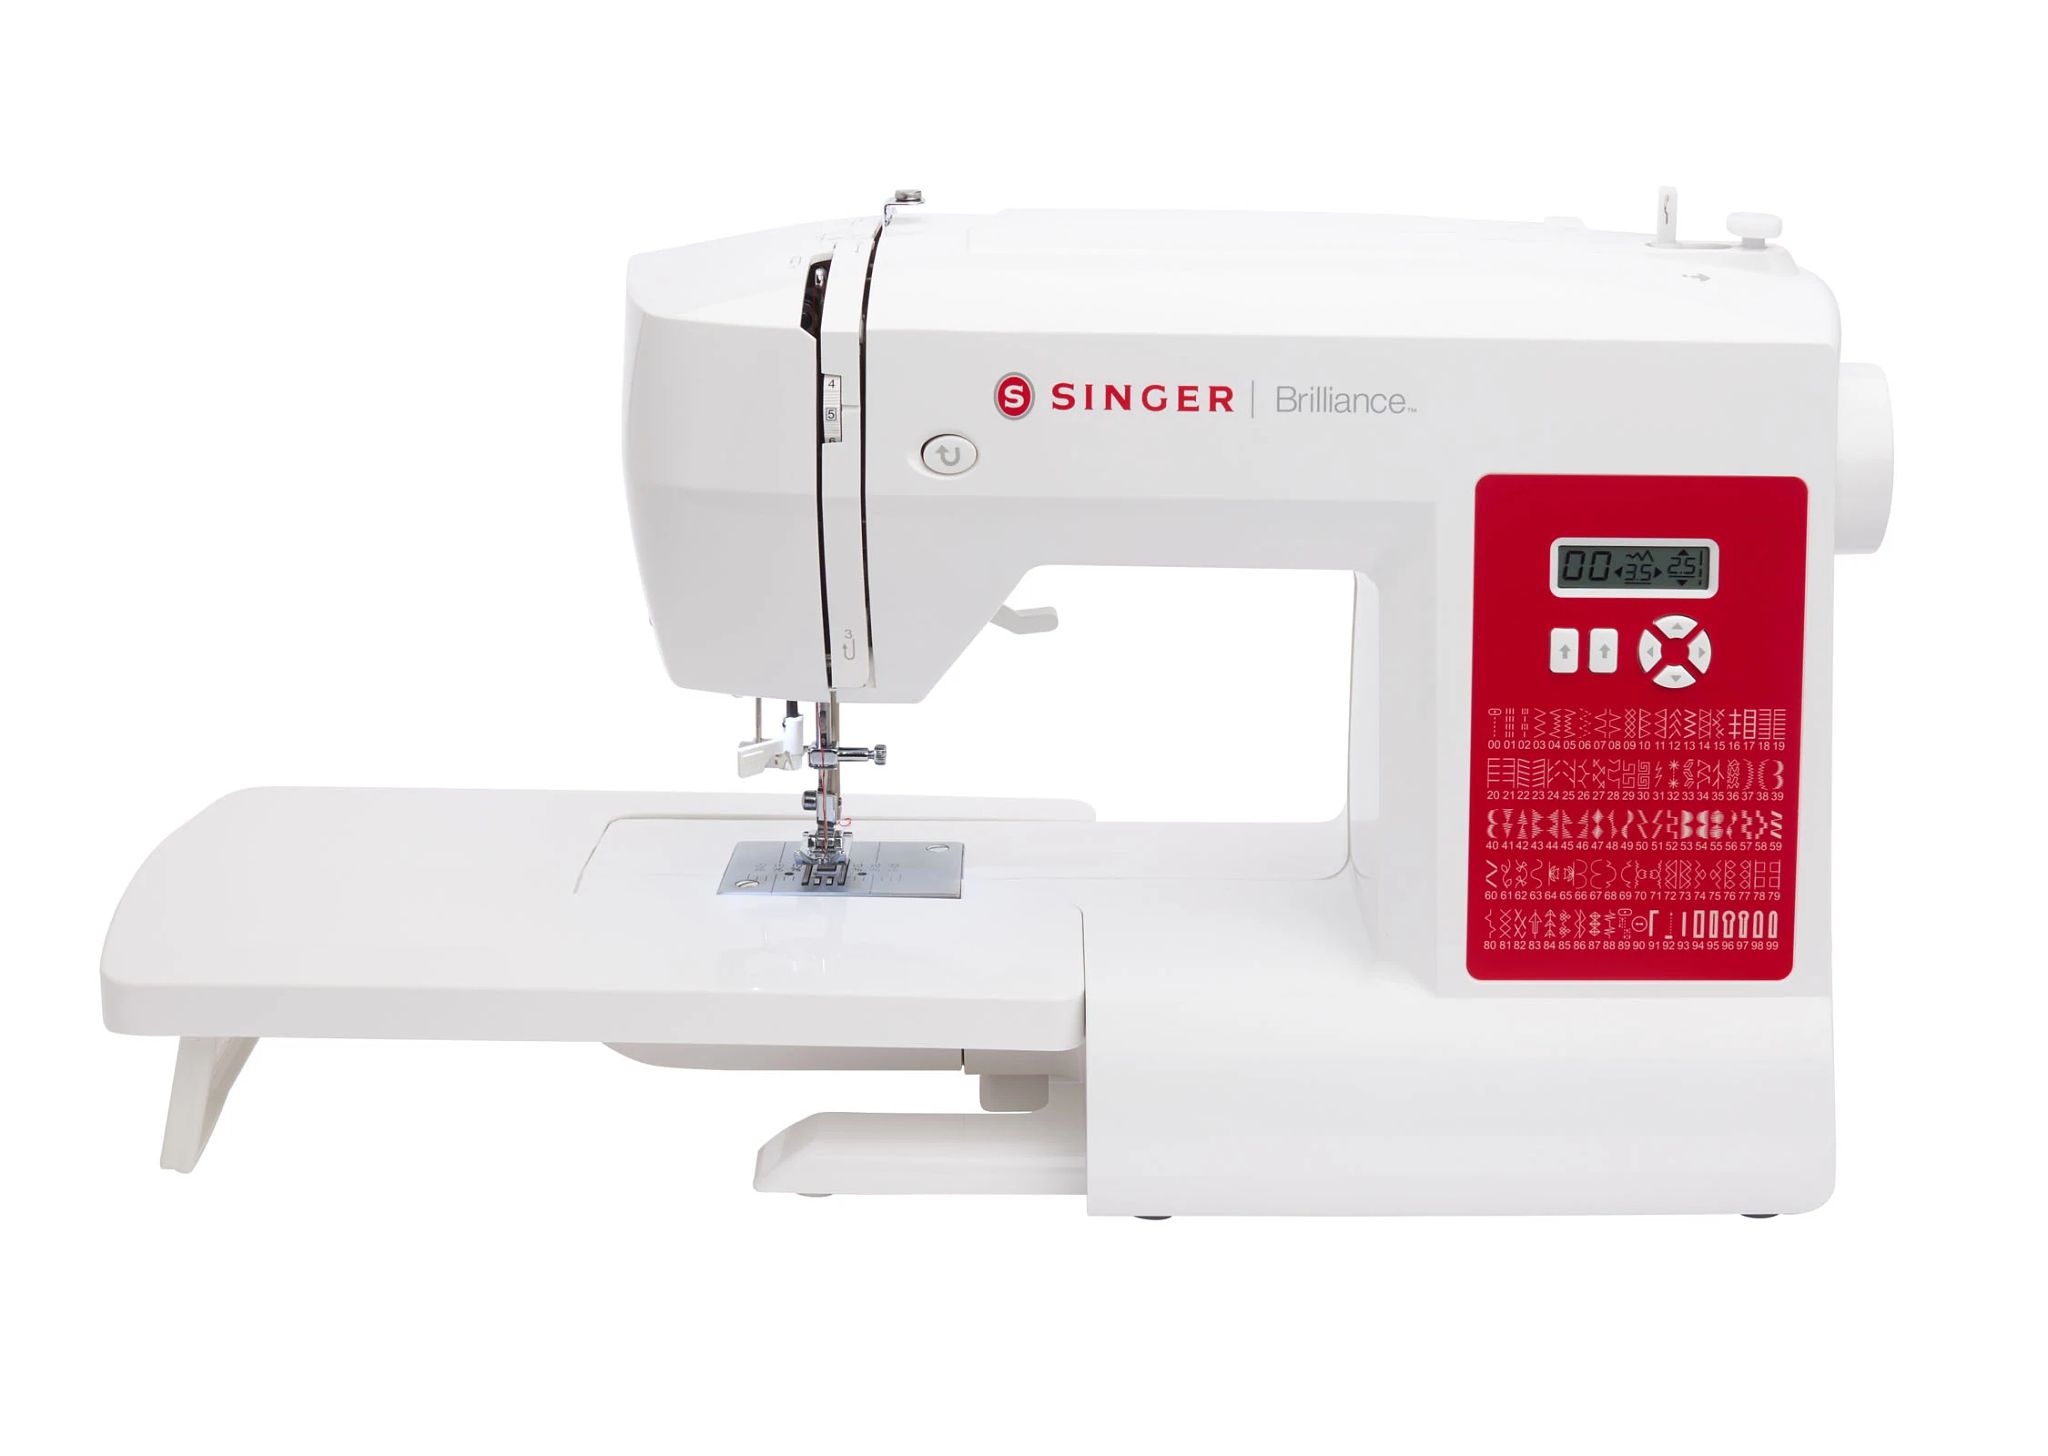 Singer 2932 Sewing Machine - 35 Stitch Patterns, Automatic Needle Threader,  Fully Automatic 1-step Buttonhole, Drop Feed for Free Motion Sewing, Free  Arm with Accessory Storage